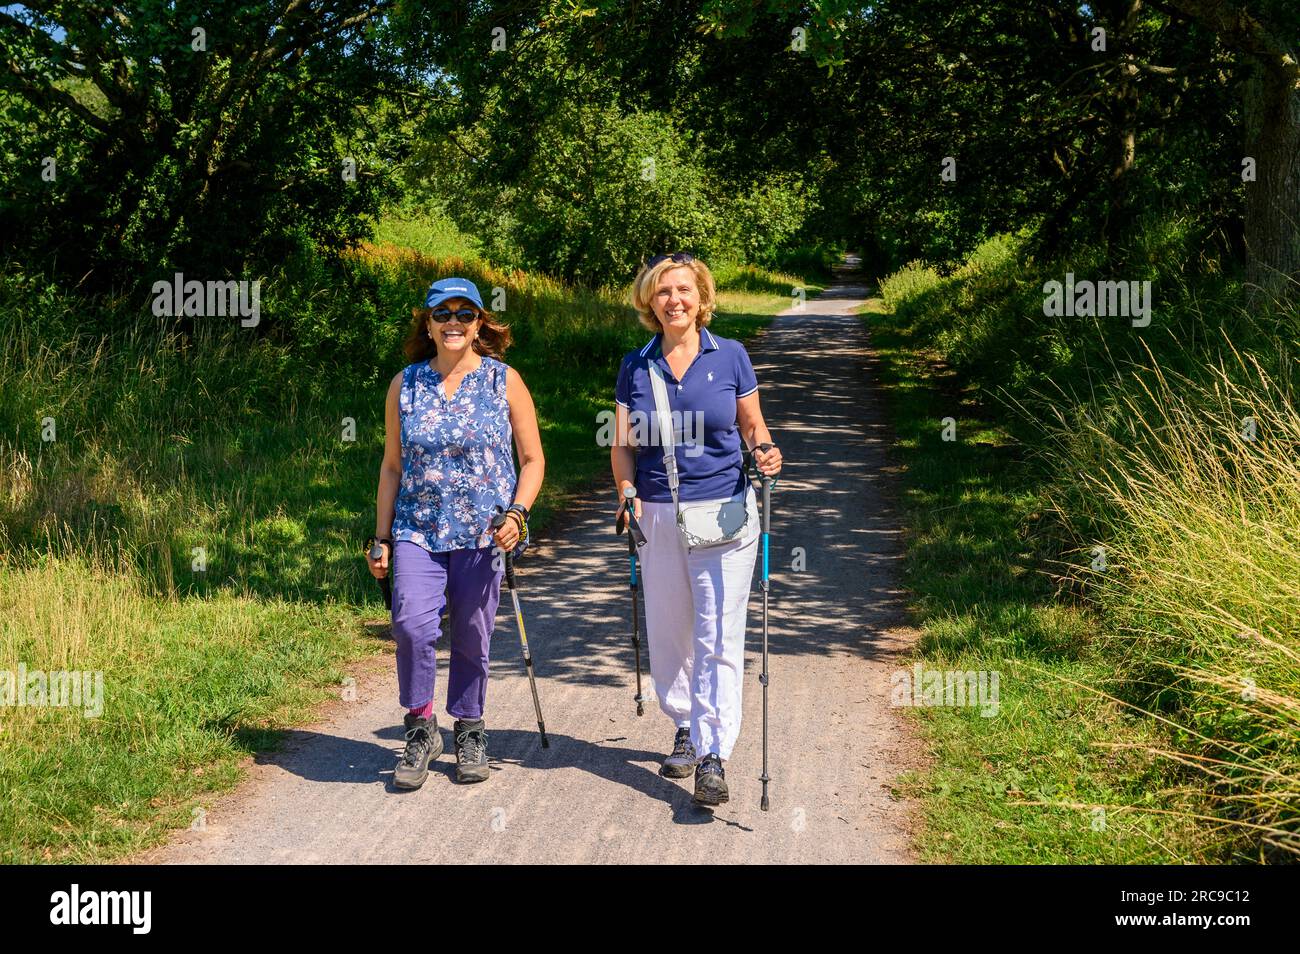 Two happy middle-aged female walkers on the Downs Link path, a disused railway line. West Grinstead, West Sussex, England. Stock Photo